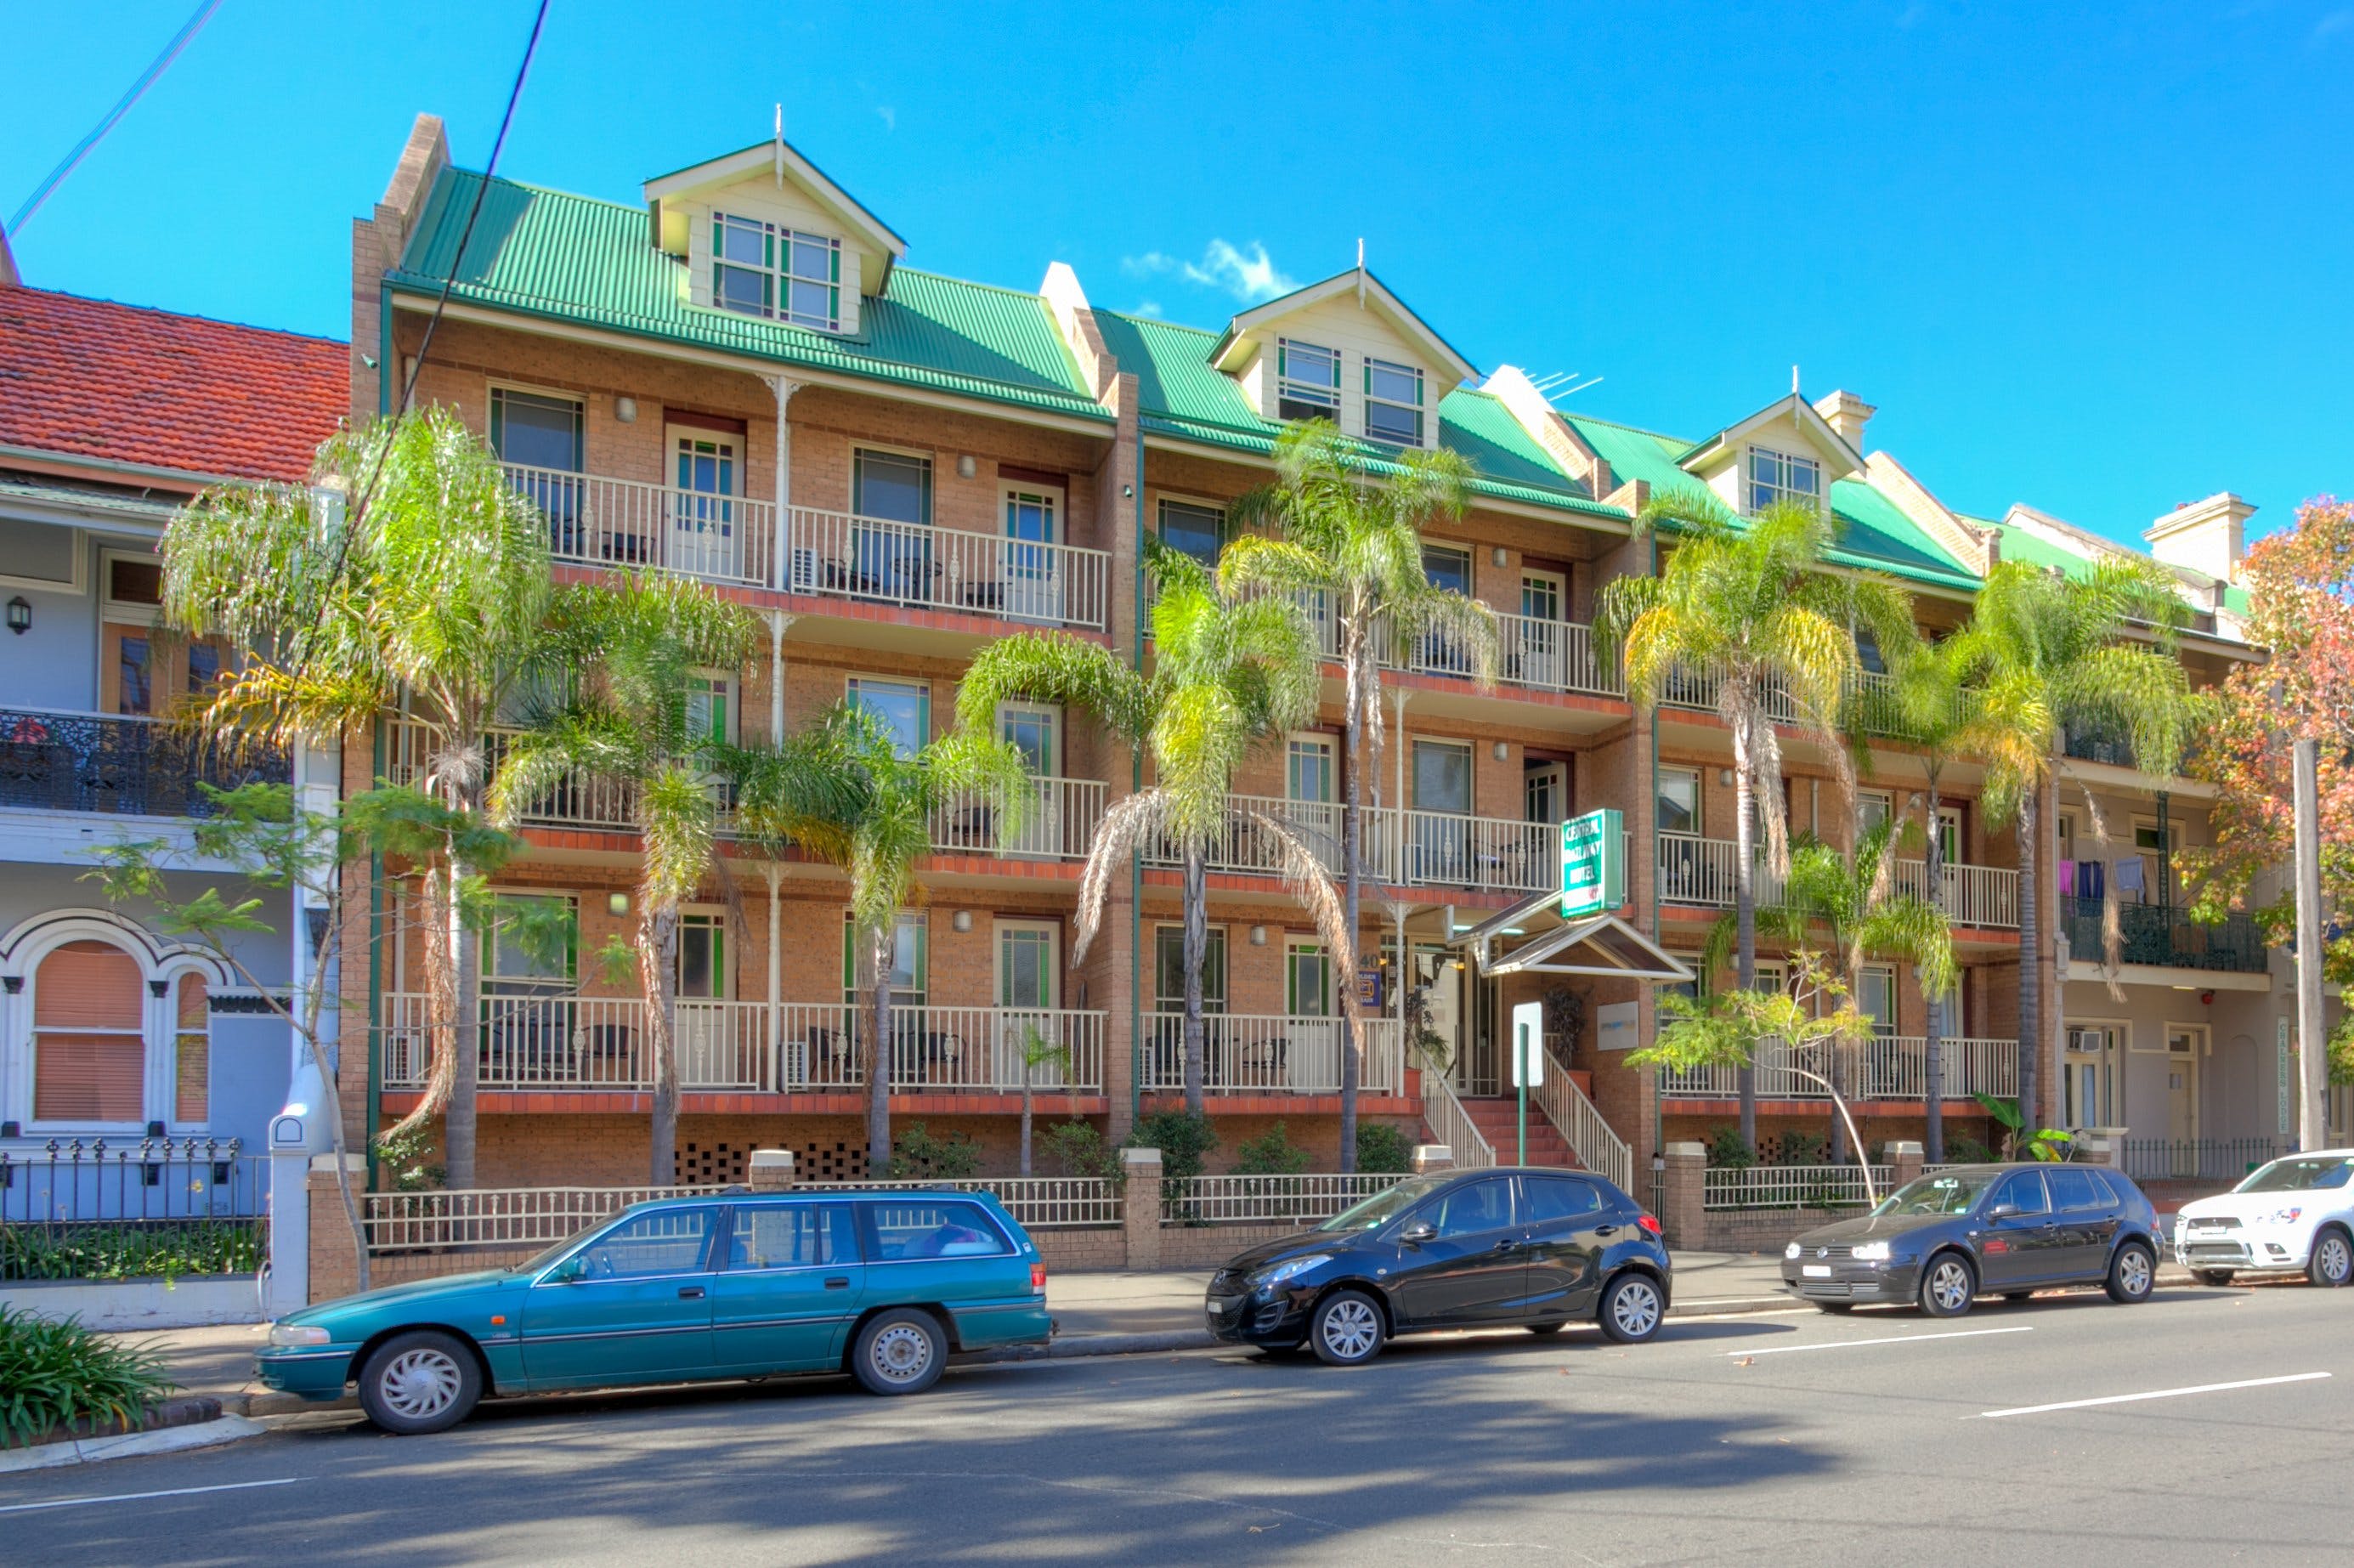 Central Railway Hotel - Lismore Accommodation